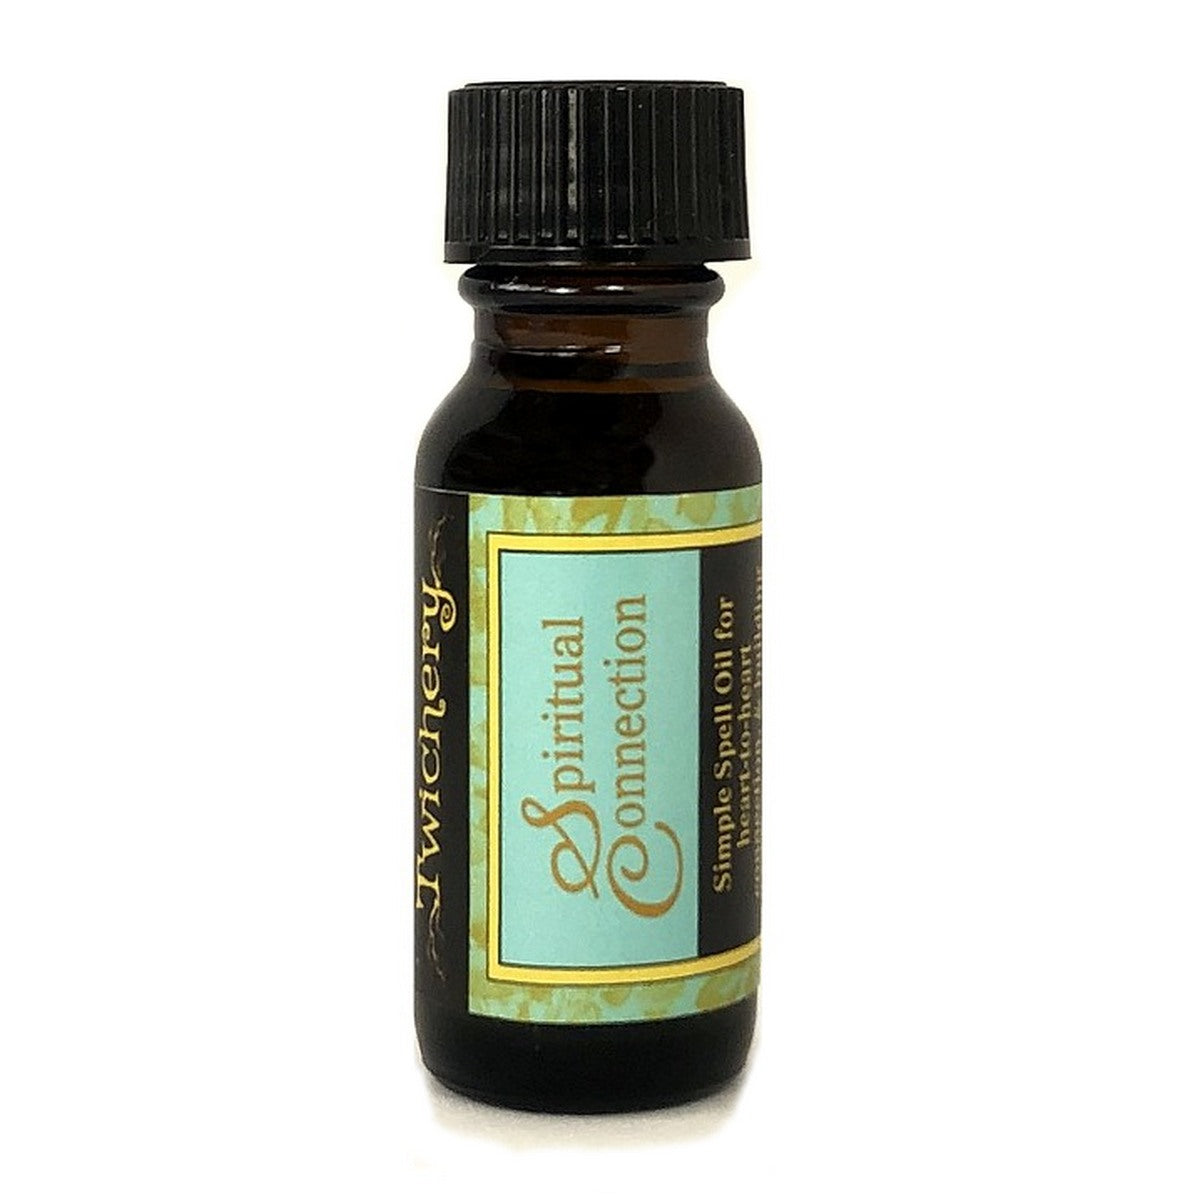 Twichery Spiritual Connection Quikspell Oil is for establishing a heartfelt connection with anyone, living or dead. Hoodoo, voodoo, wicca, pagan, Witchcraft Made Simple